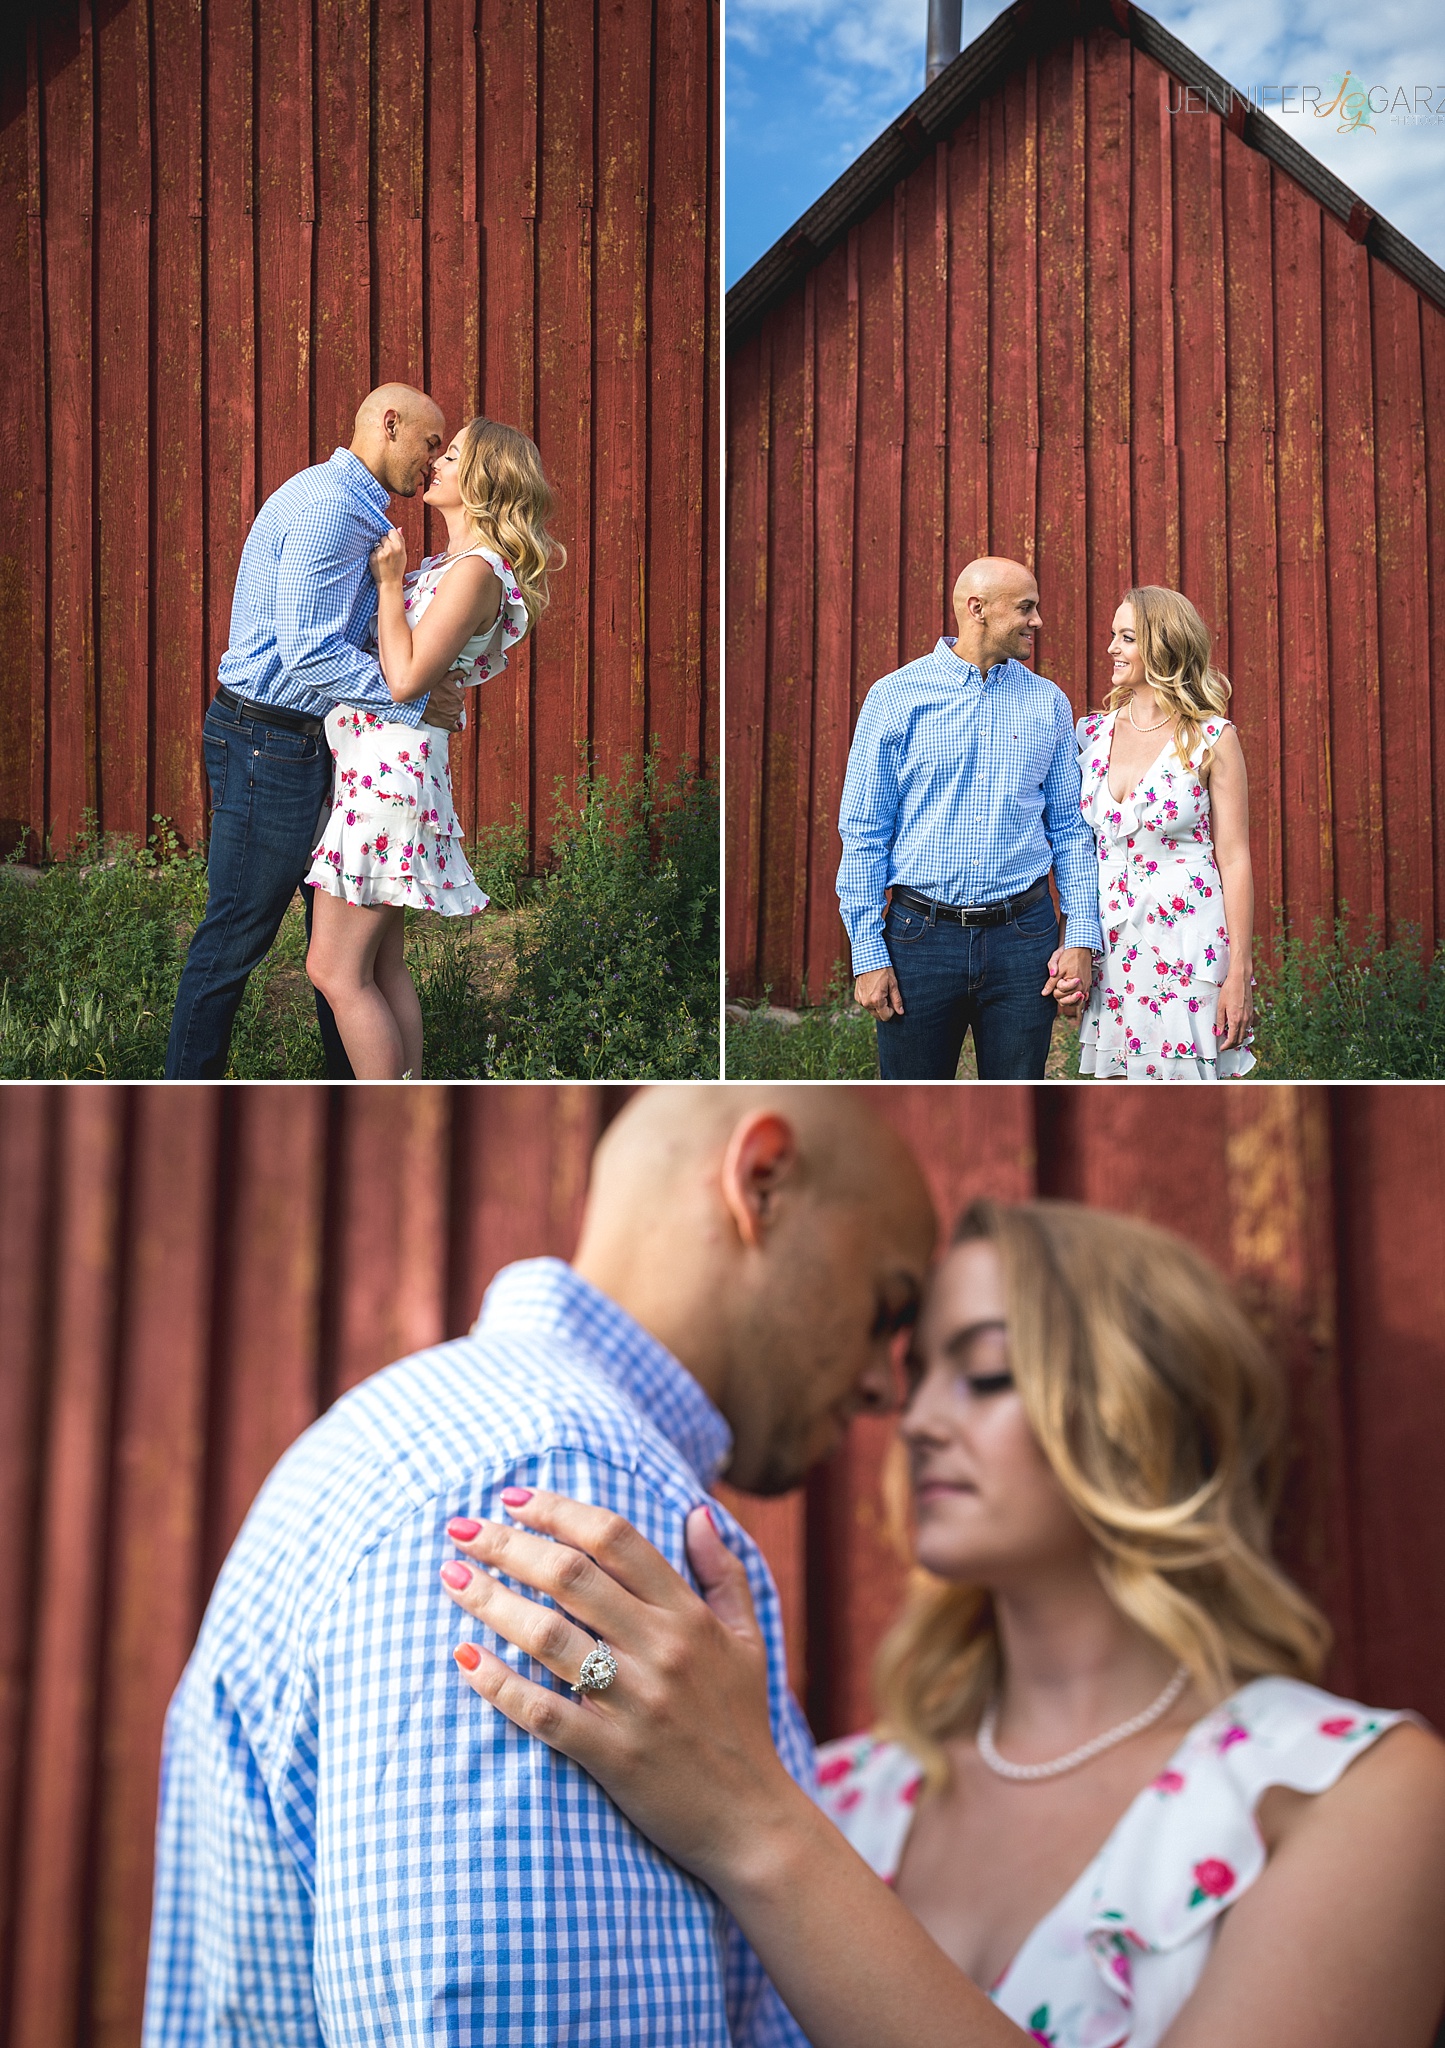 Bright Red Barn Engagement Photos at Clear Creek History Park by Jennifer Garza Photography.